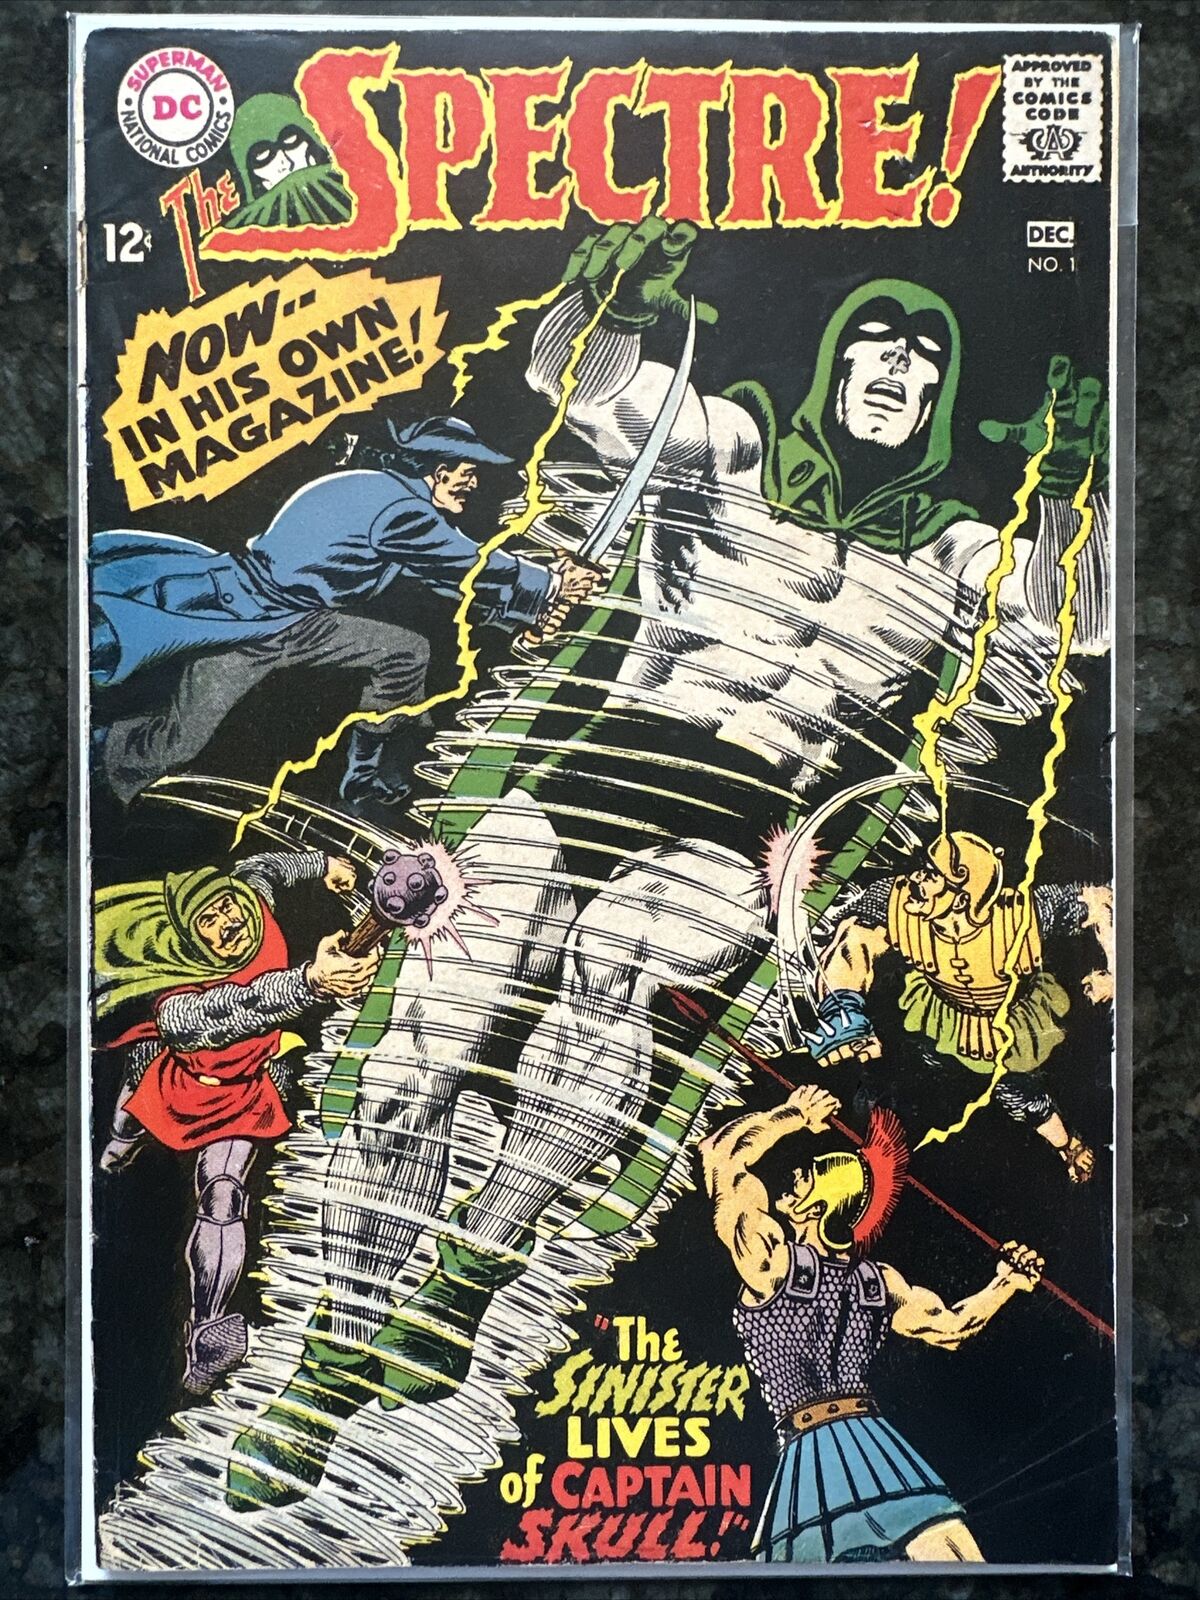 The Spectre #1 1967 Key DC Comic Book 1st Solo Series Featuring The Spectre